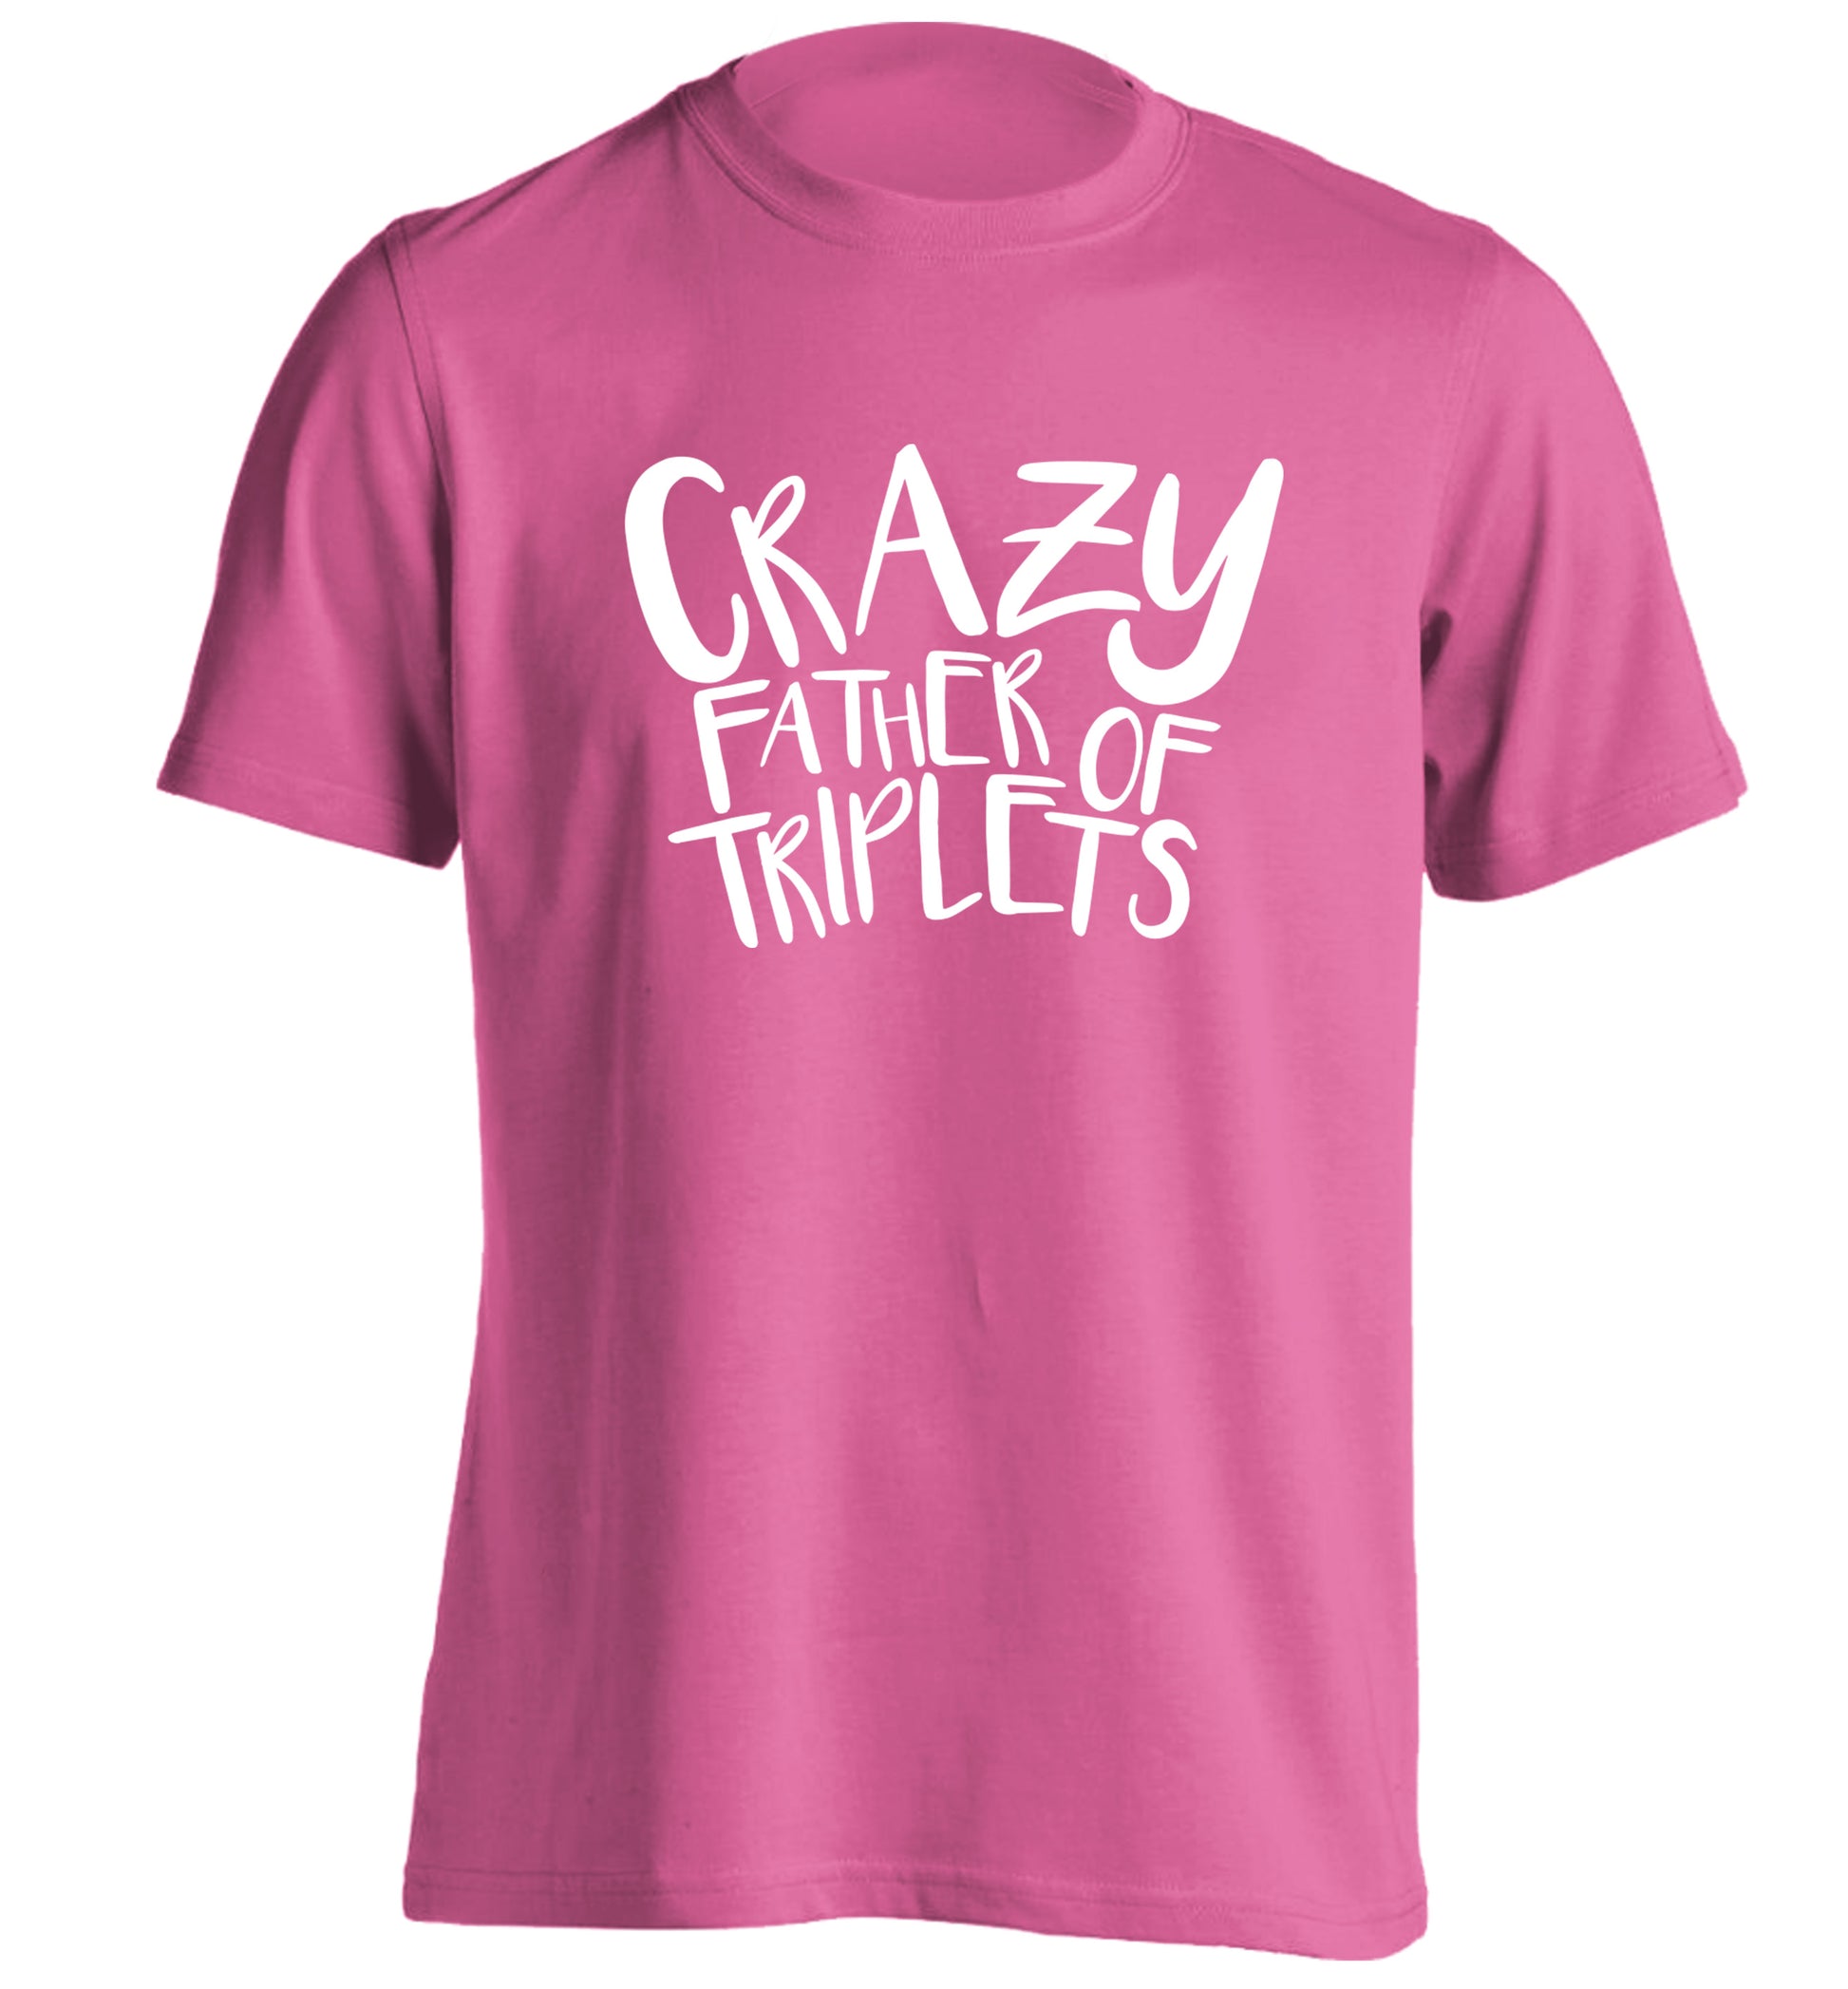 Crazy father of triplets adults unisex pink Tshirt 2XL